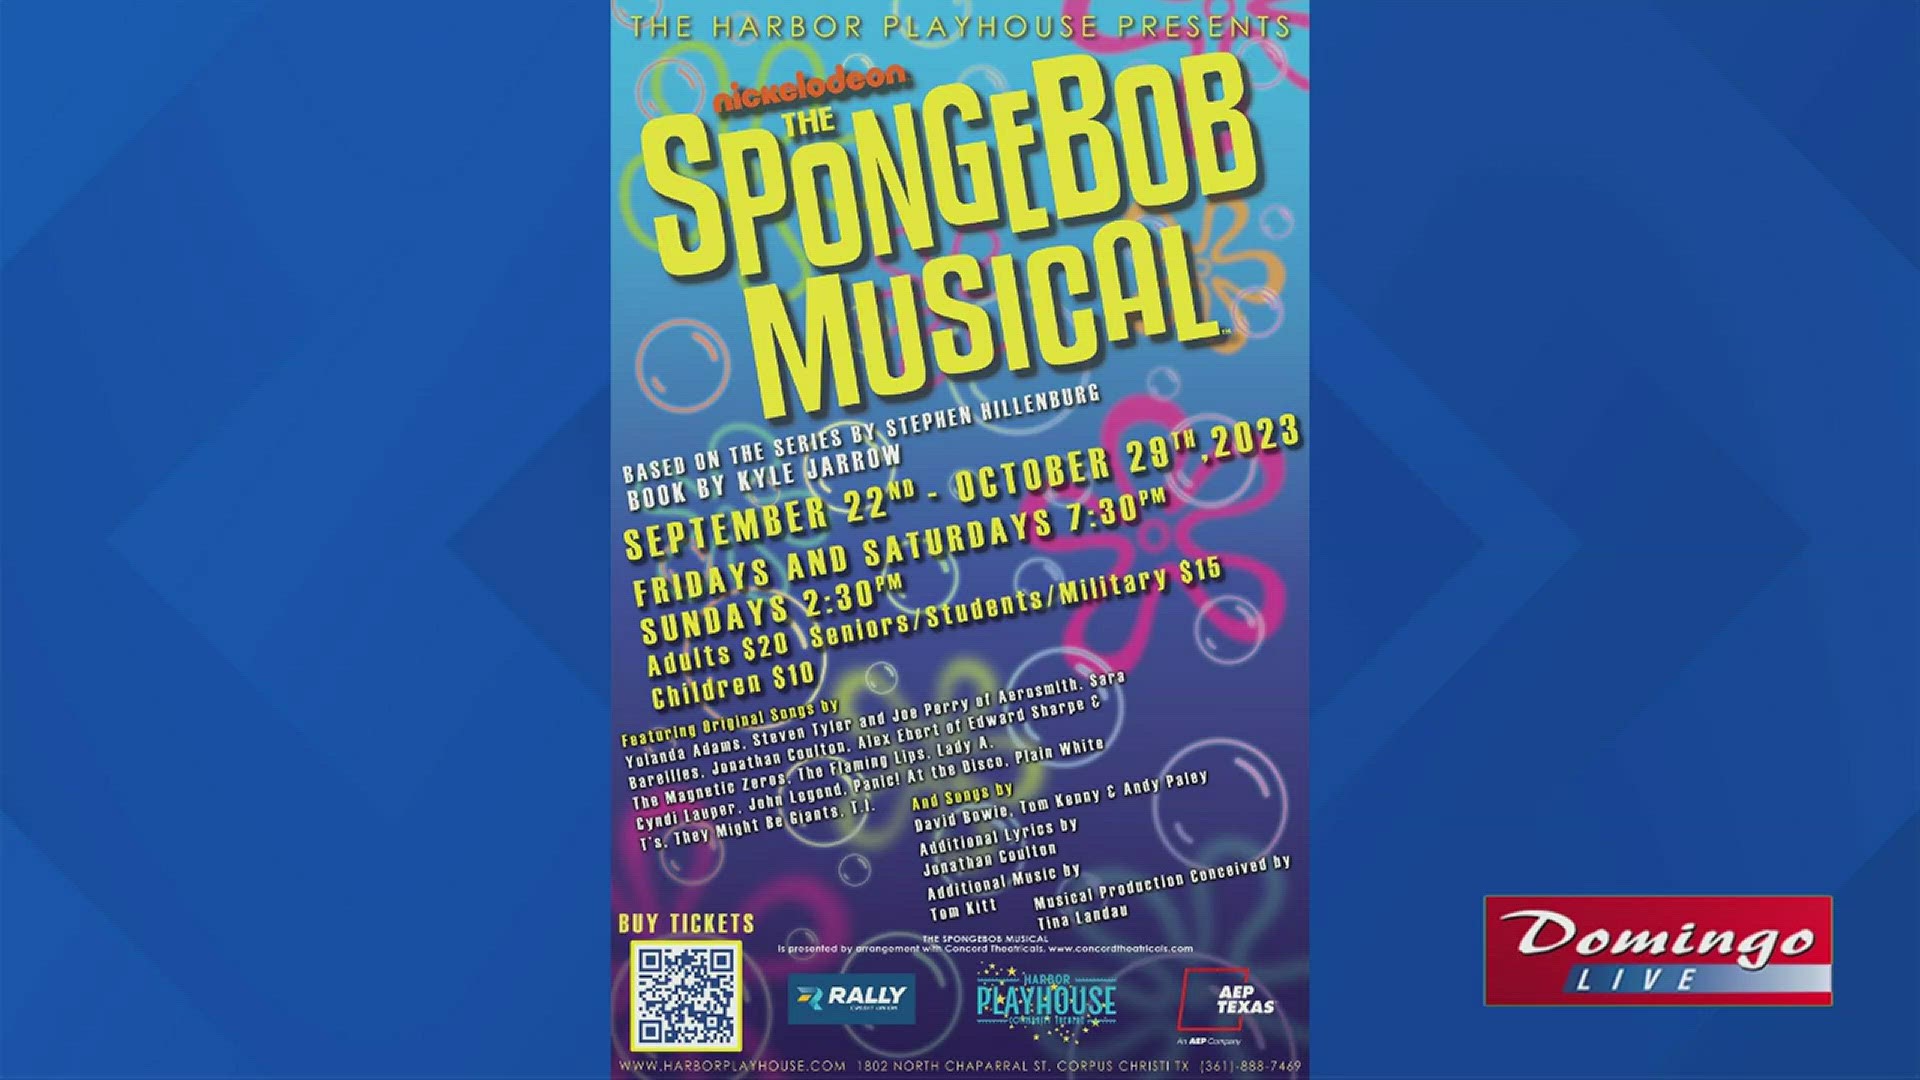 "The SpongeBob Musical" comes to Harbor Playhouse Sept. 22 and will run until Oct. 29.